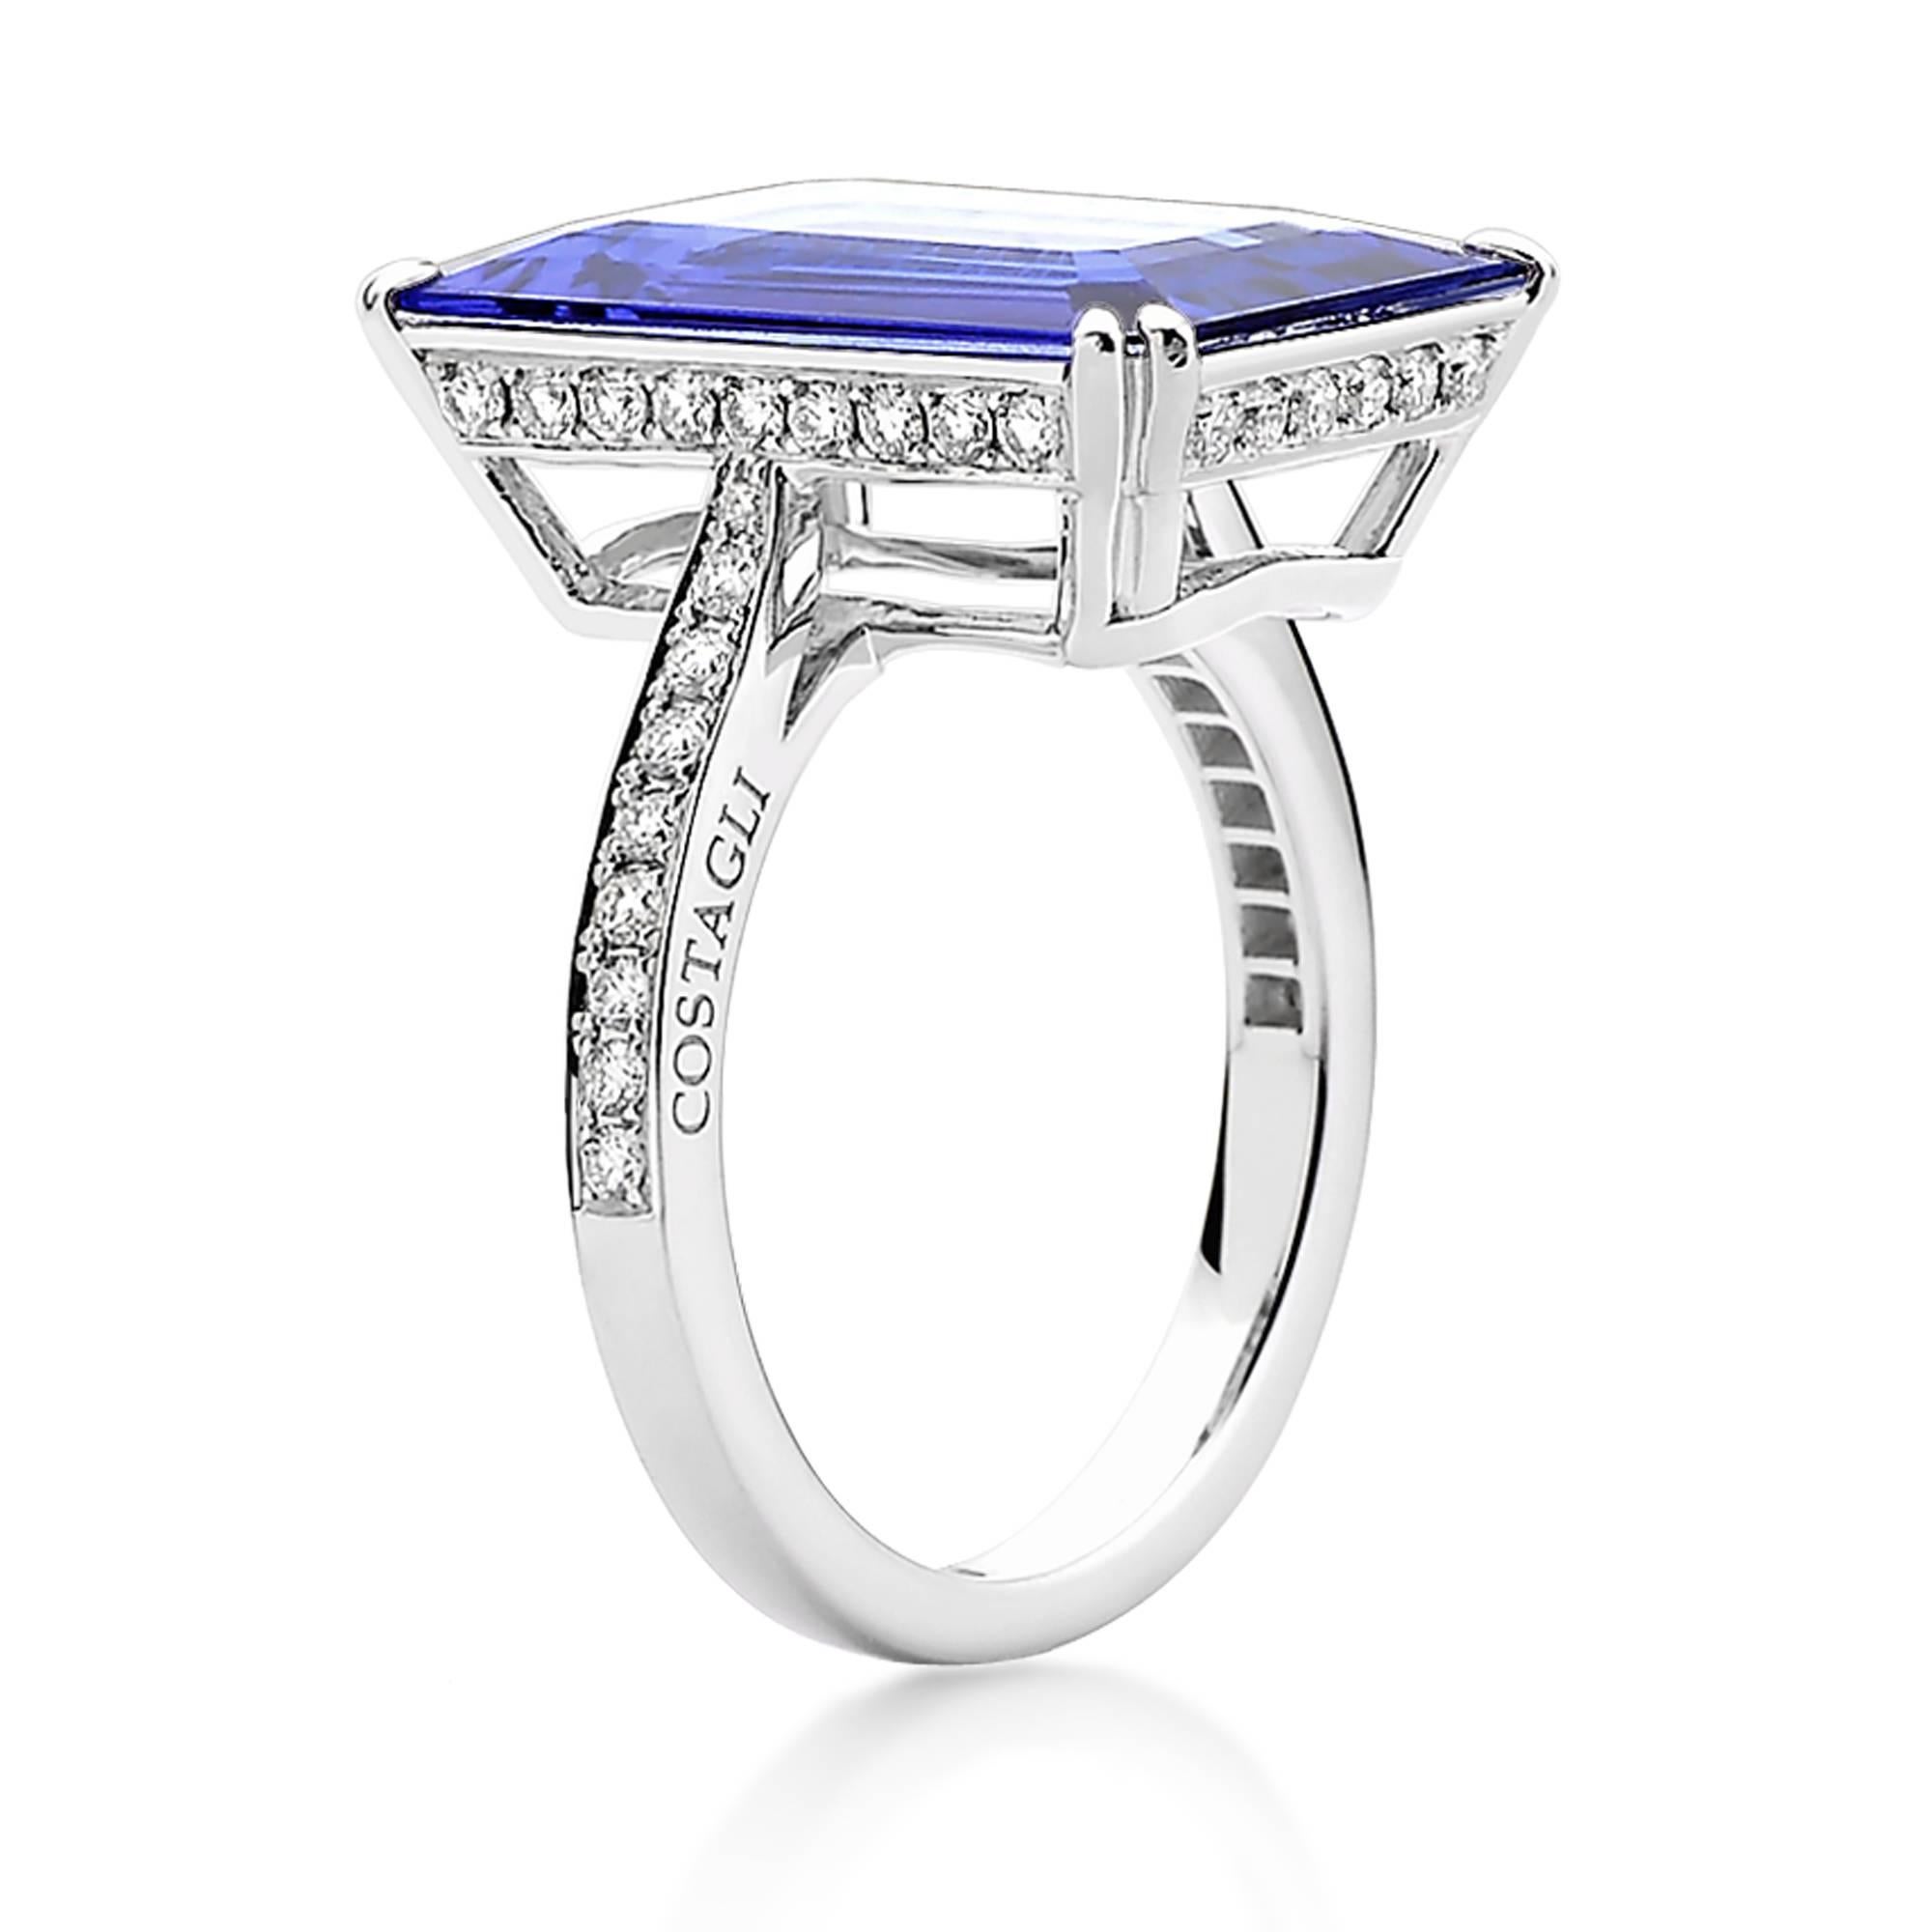 One of a kind emerald cut tanzanite 4.72 ring set in 18kt white gold with pave-set round, brilliant diamonds 0.67 carats.

An amazing and incredibly unusual emerald cut tanzanite shines bright in this 18kt gold and diamond ring.

The white and clean